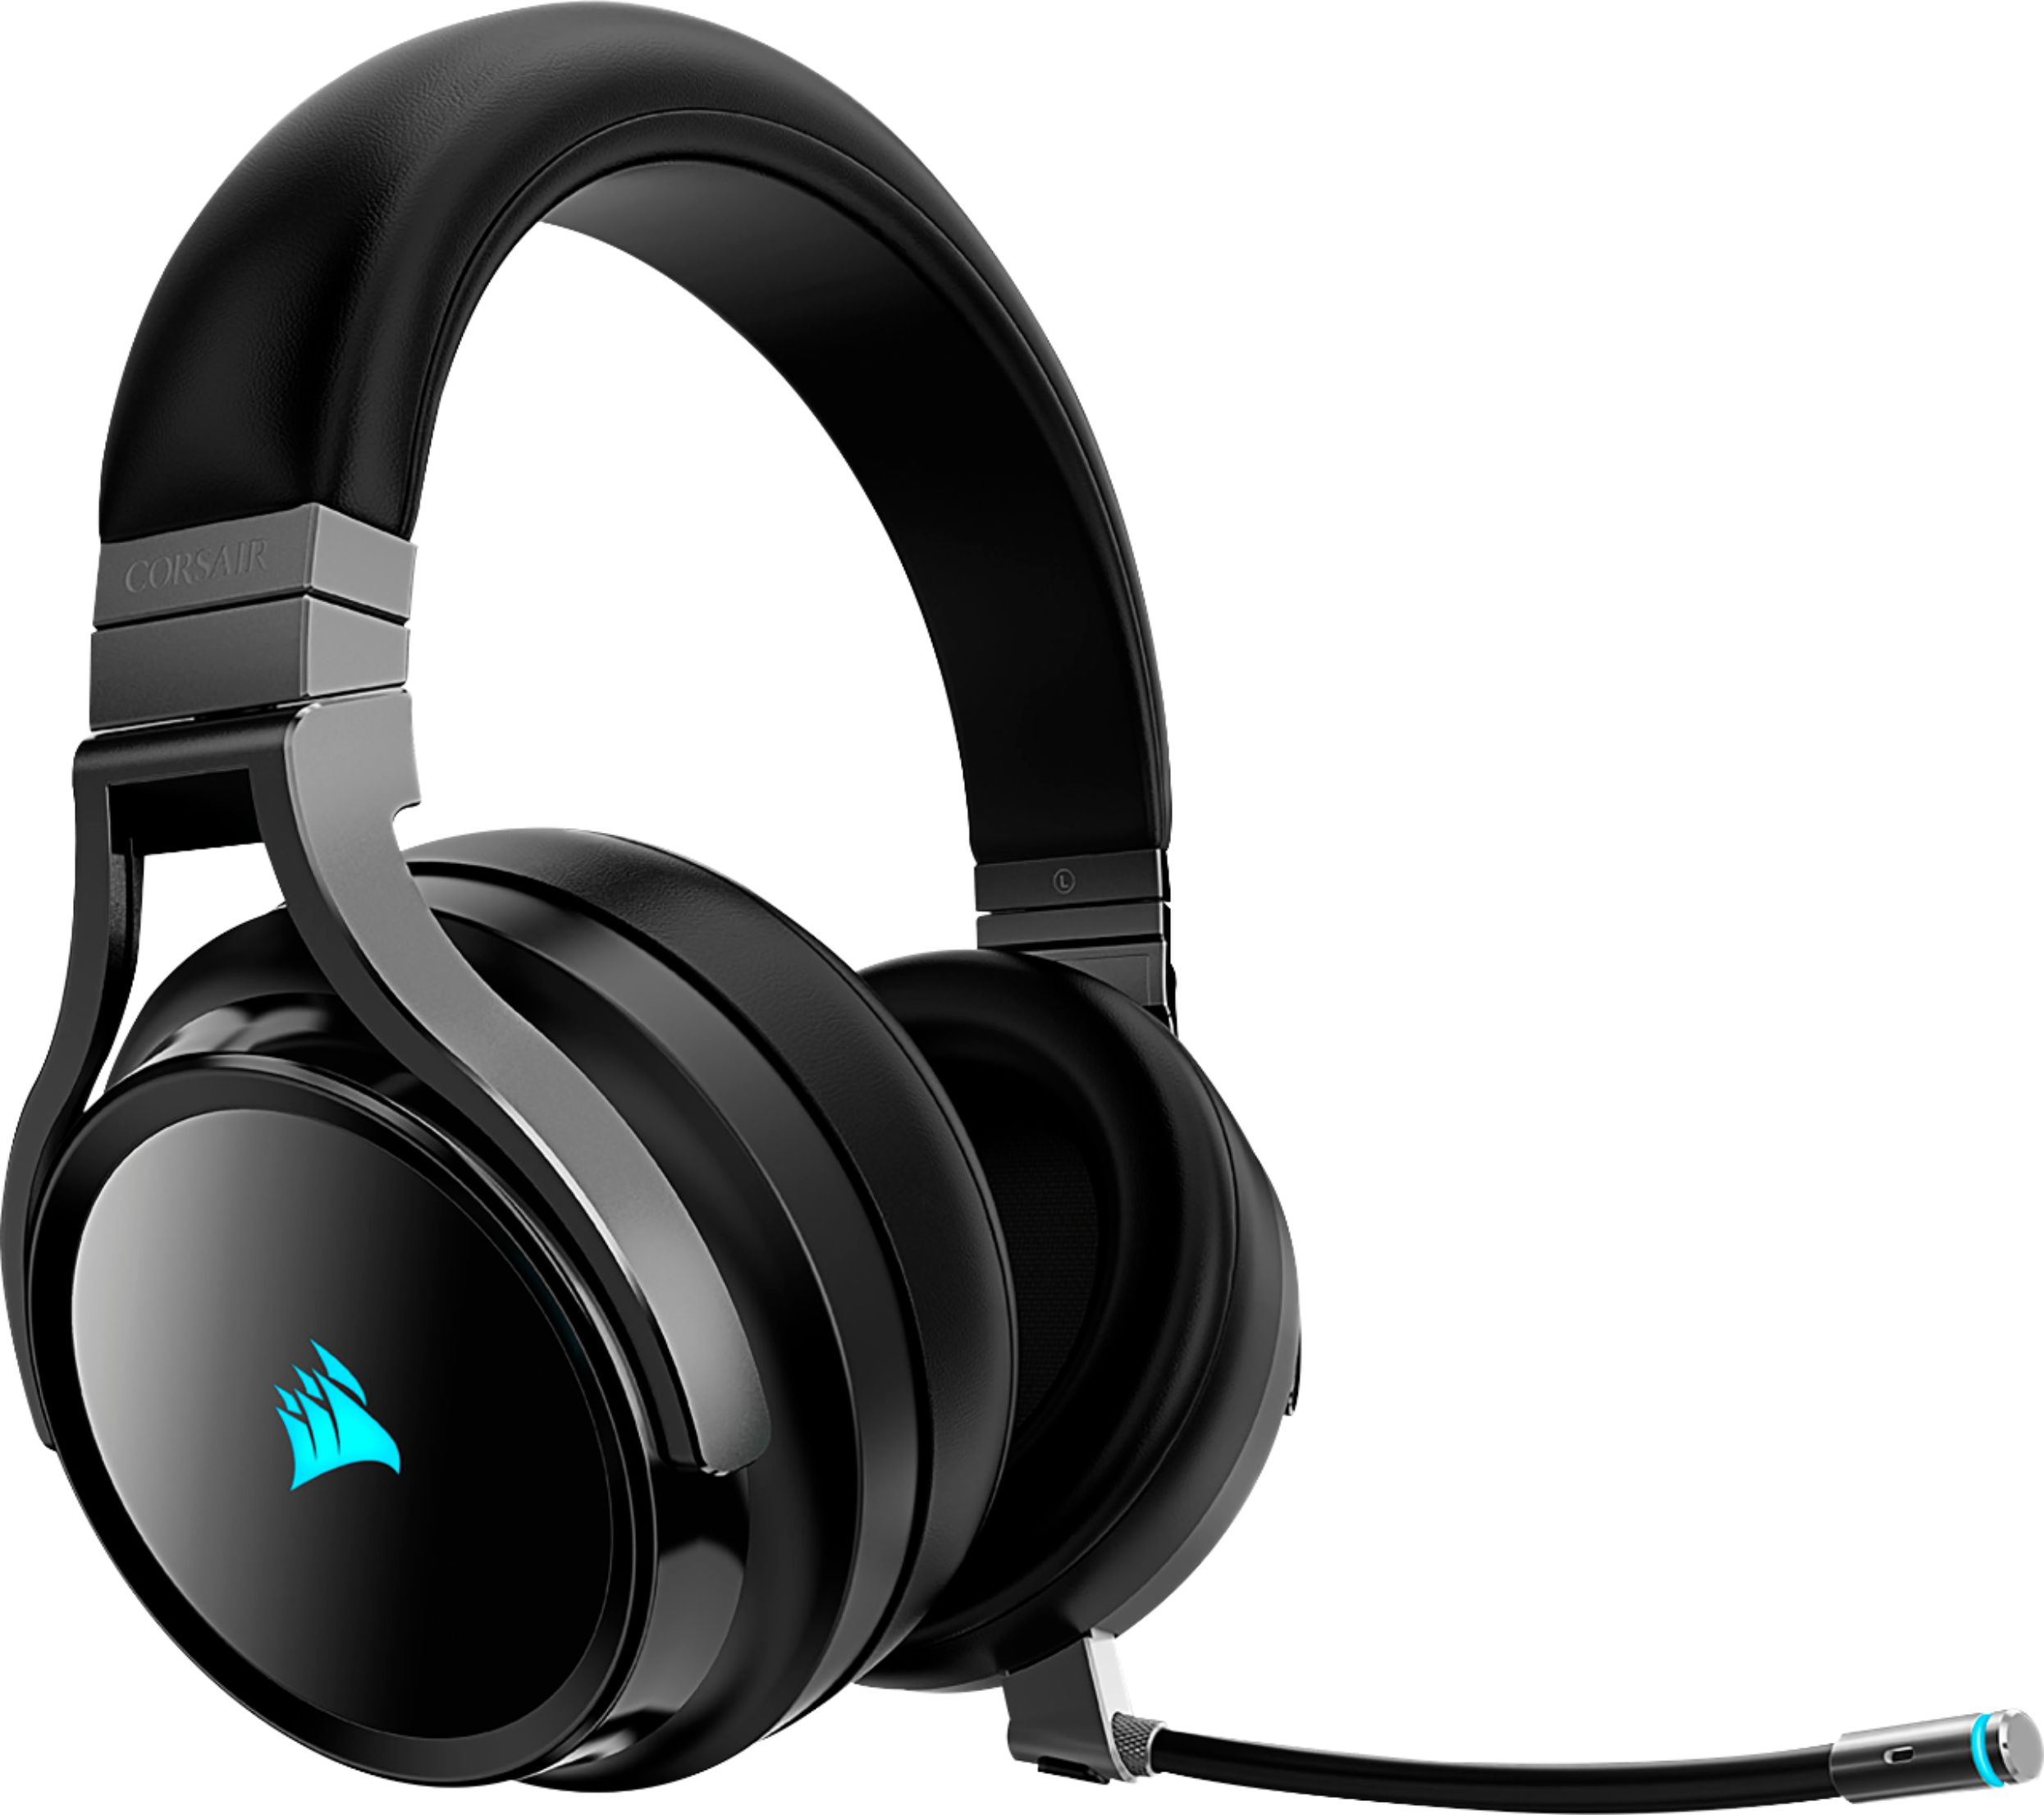 Left View: CORSAIR - VIRTUOSO RGB Wireless Stereo Gaming Headset - Carbon